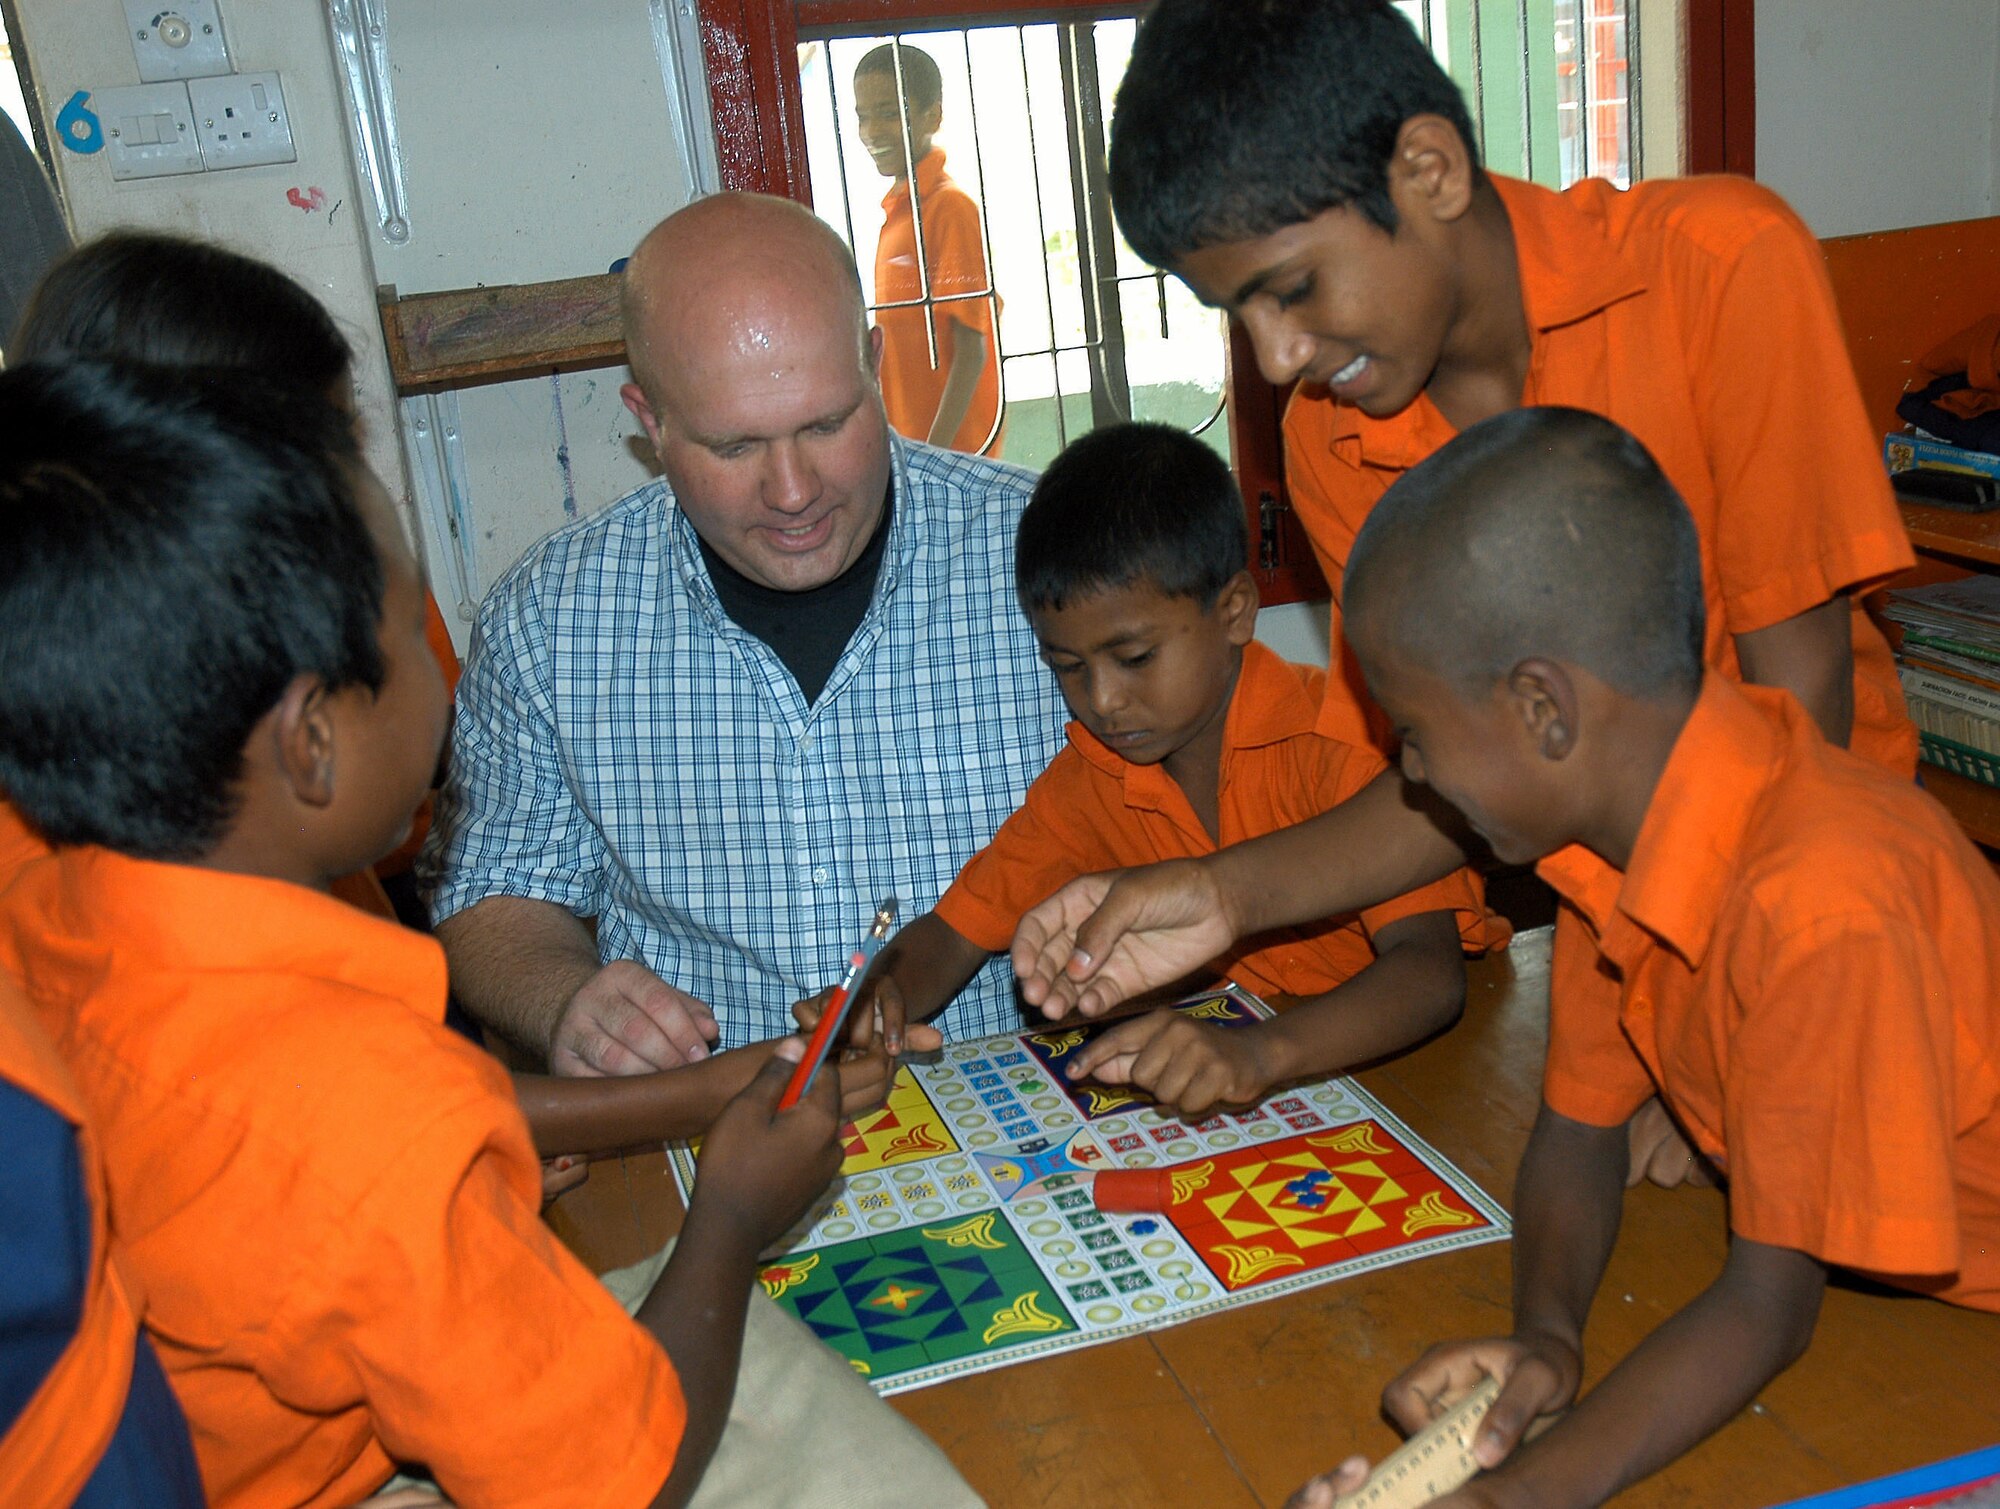 Capt. Darin Wheeler plays a game with fifth graders from Eglal's ABC School April 27 in Dhaka, Bangladesh. Captain Wheeler and members of the 353rd Special Operations Group are in Bangladesh for joint combined exercise training with the Bangladesh air force. (U.S. Air Force photo/Master Sgt. Marilyn Holliday) 
